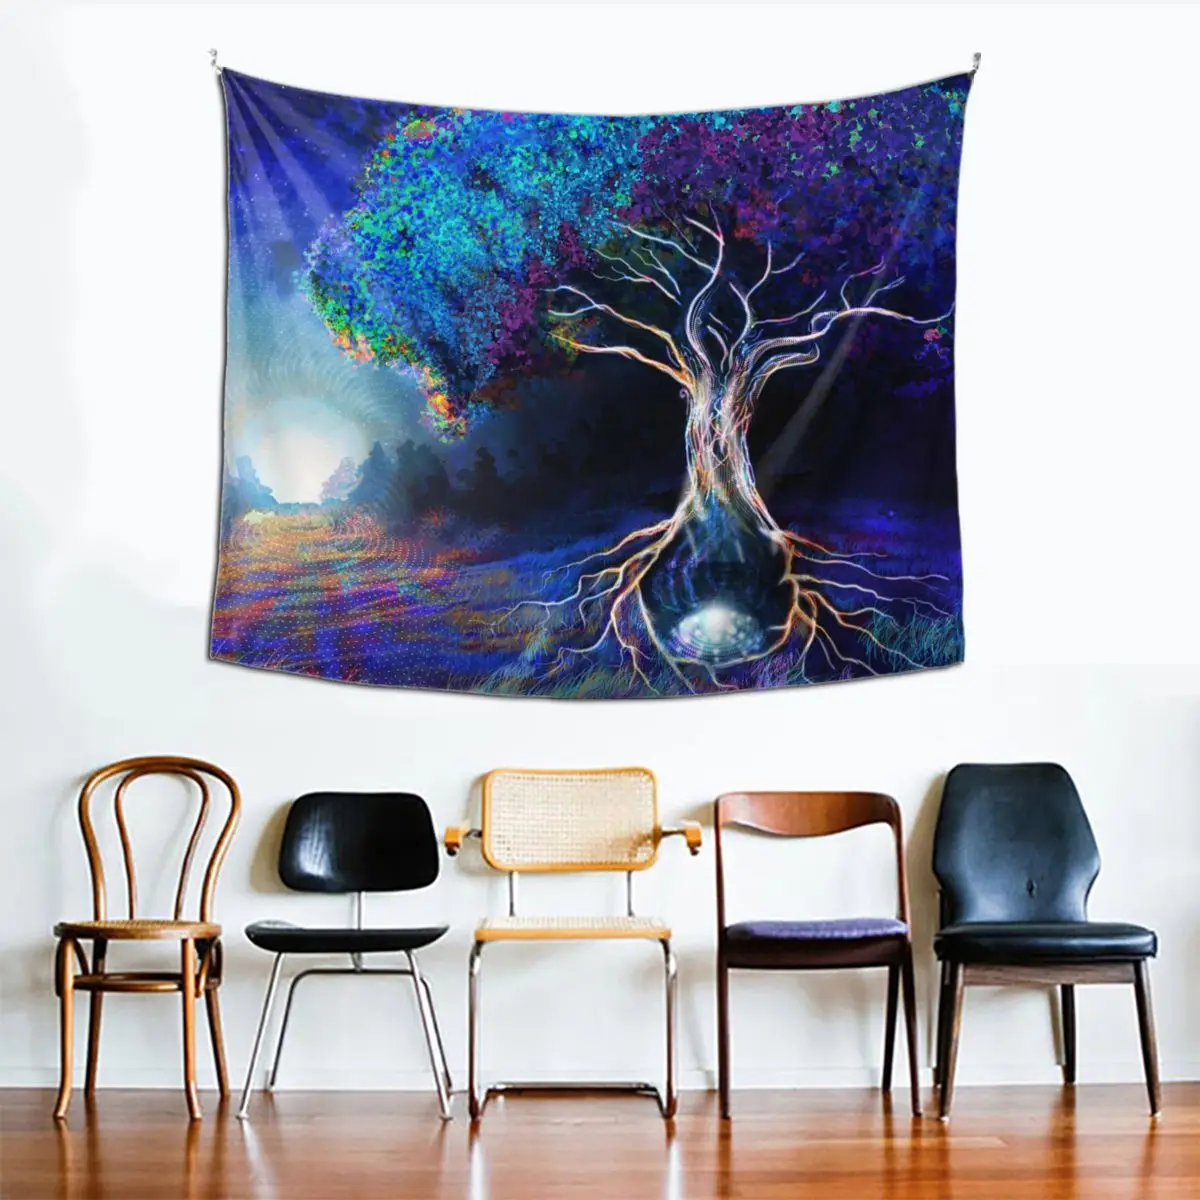 

Psychedelic Tree Of Life Vikings Tapestry Hippie Fabric Wall Hanging Viking Decoration for Bedroom Curtain Art Tapestries